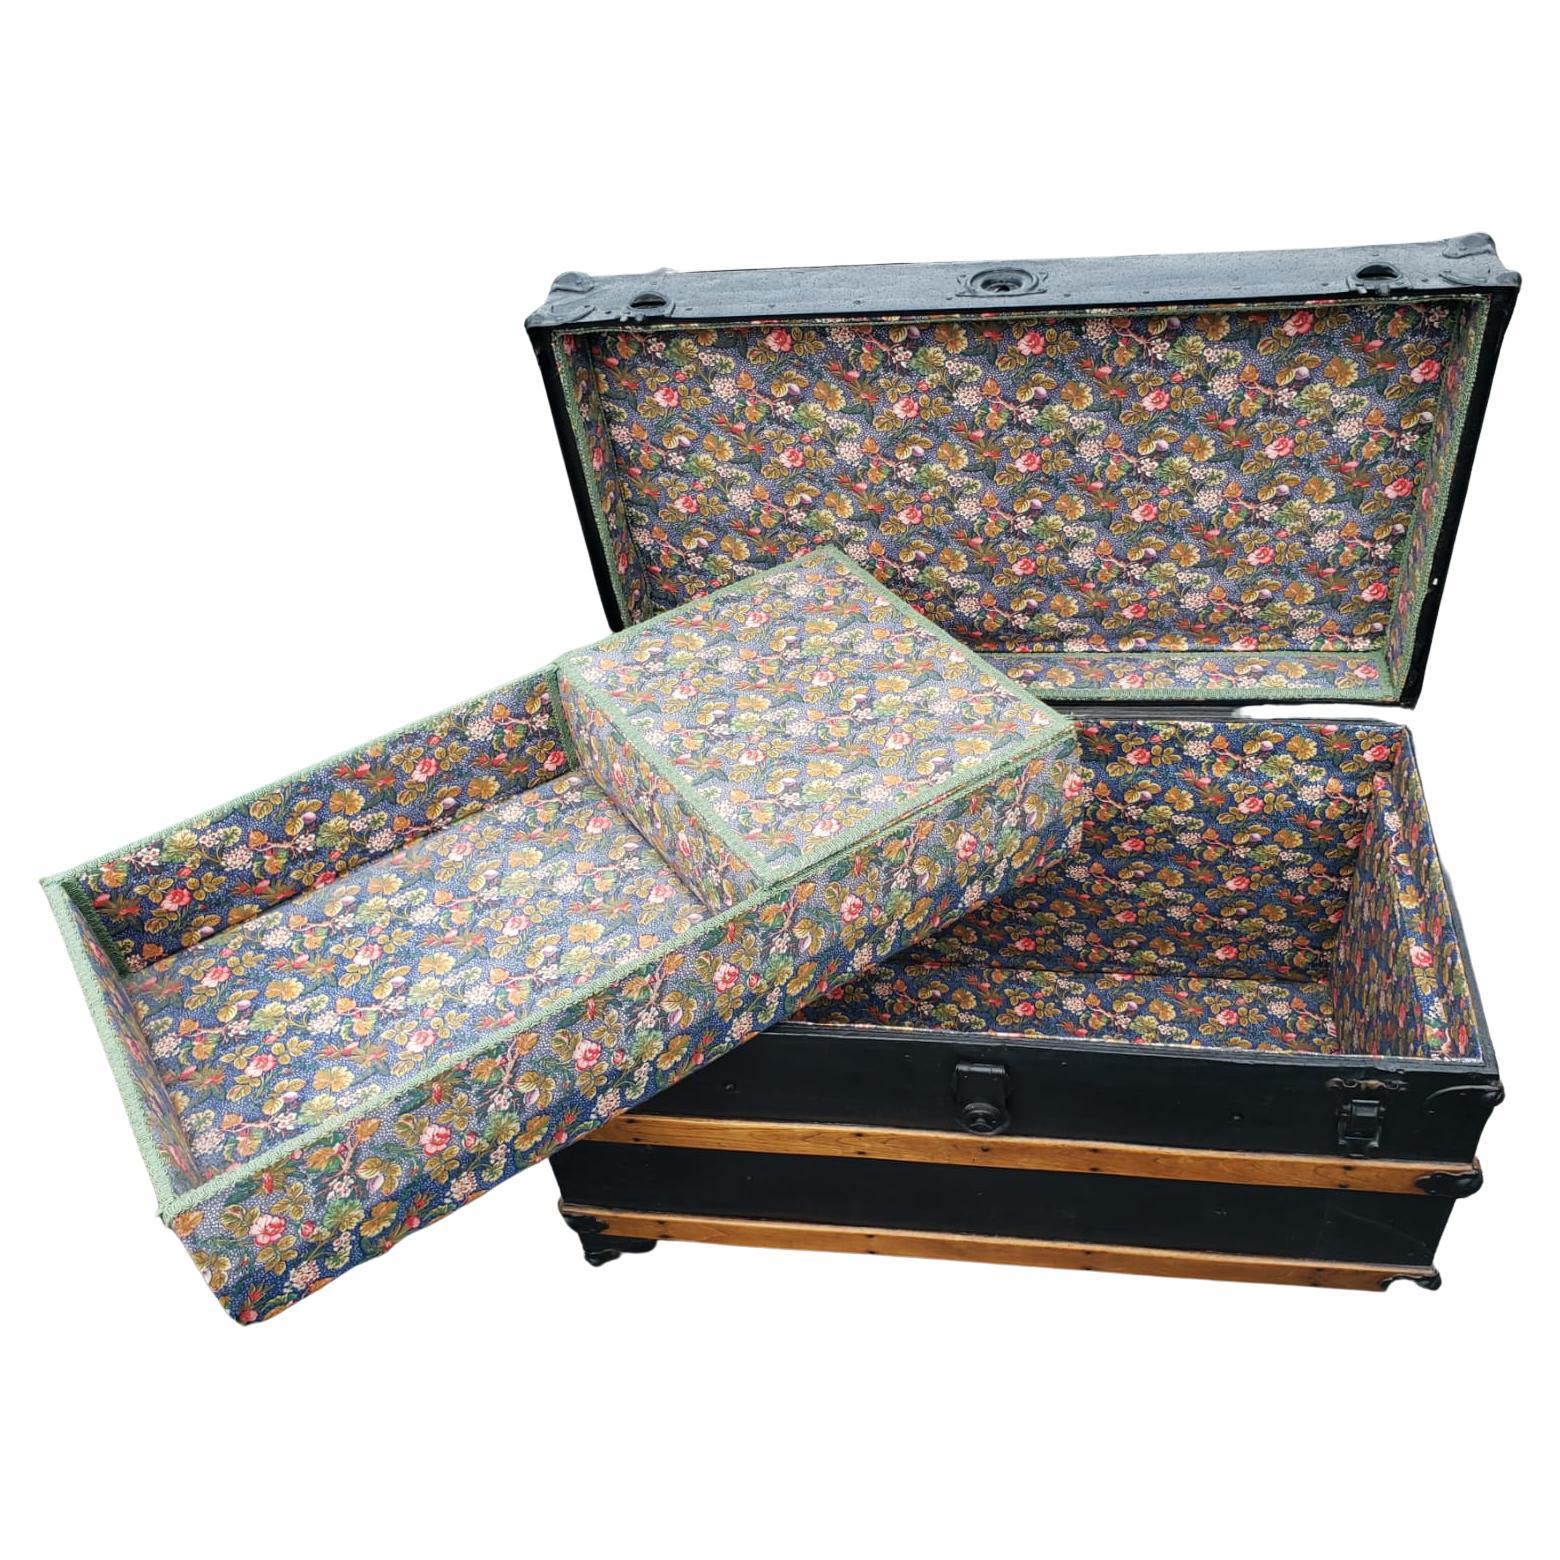 This antiques blanket has just been refinished in the outside as well as the inside. The inside is completely upholstered with fine soft cotton and polyester fabric with trims. Absolutely beautiful storage or show piece. New leather handles as well.